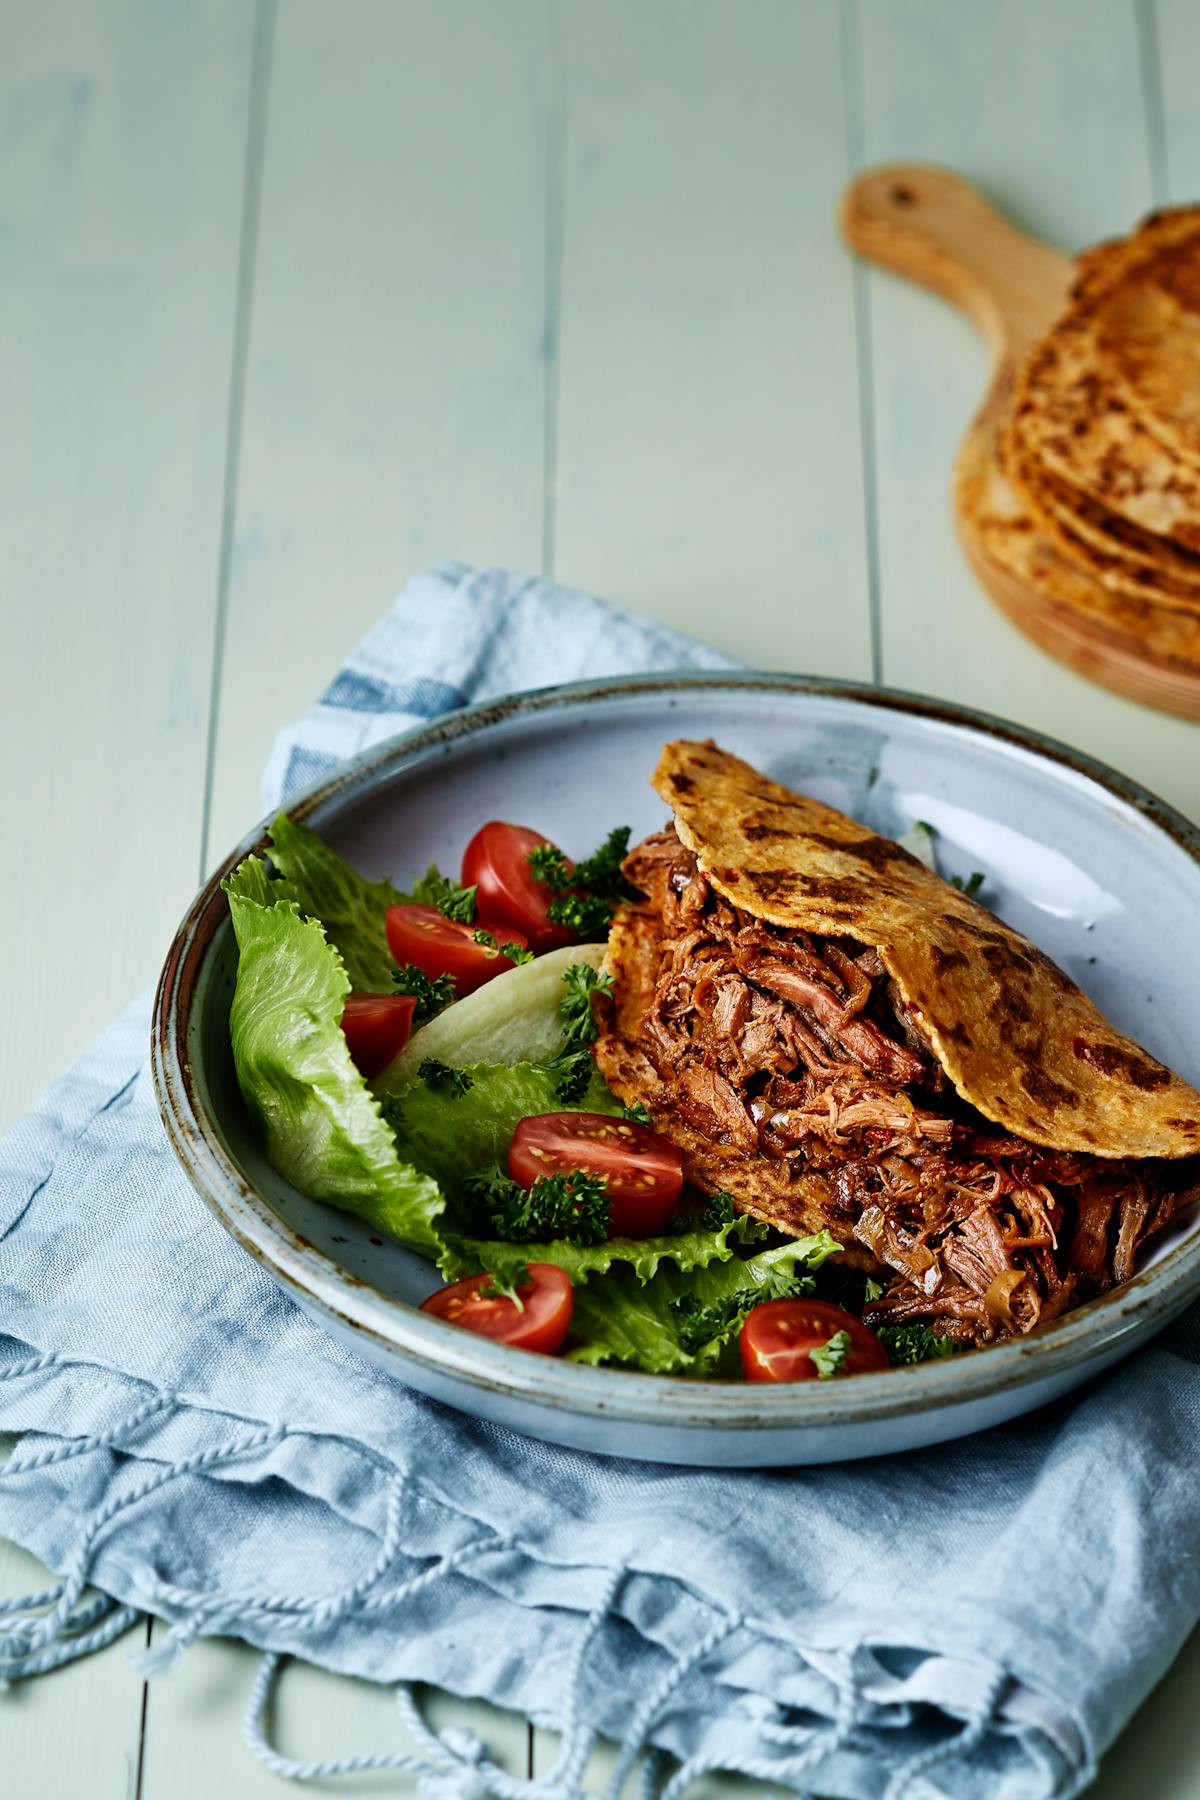 Pulled Indian beef with low-carb roti bread